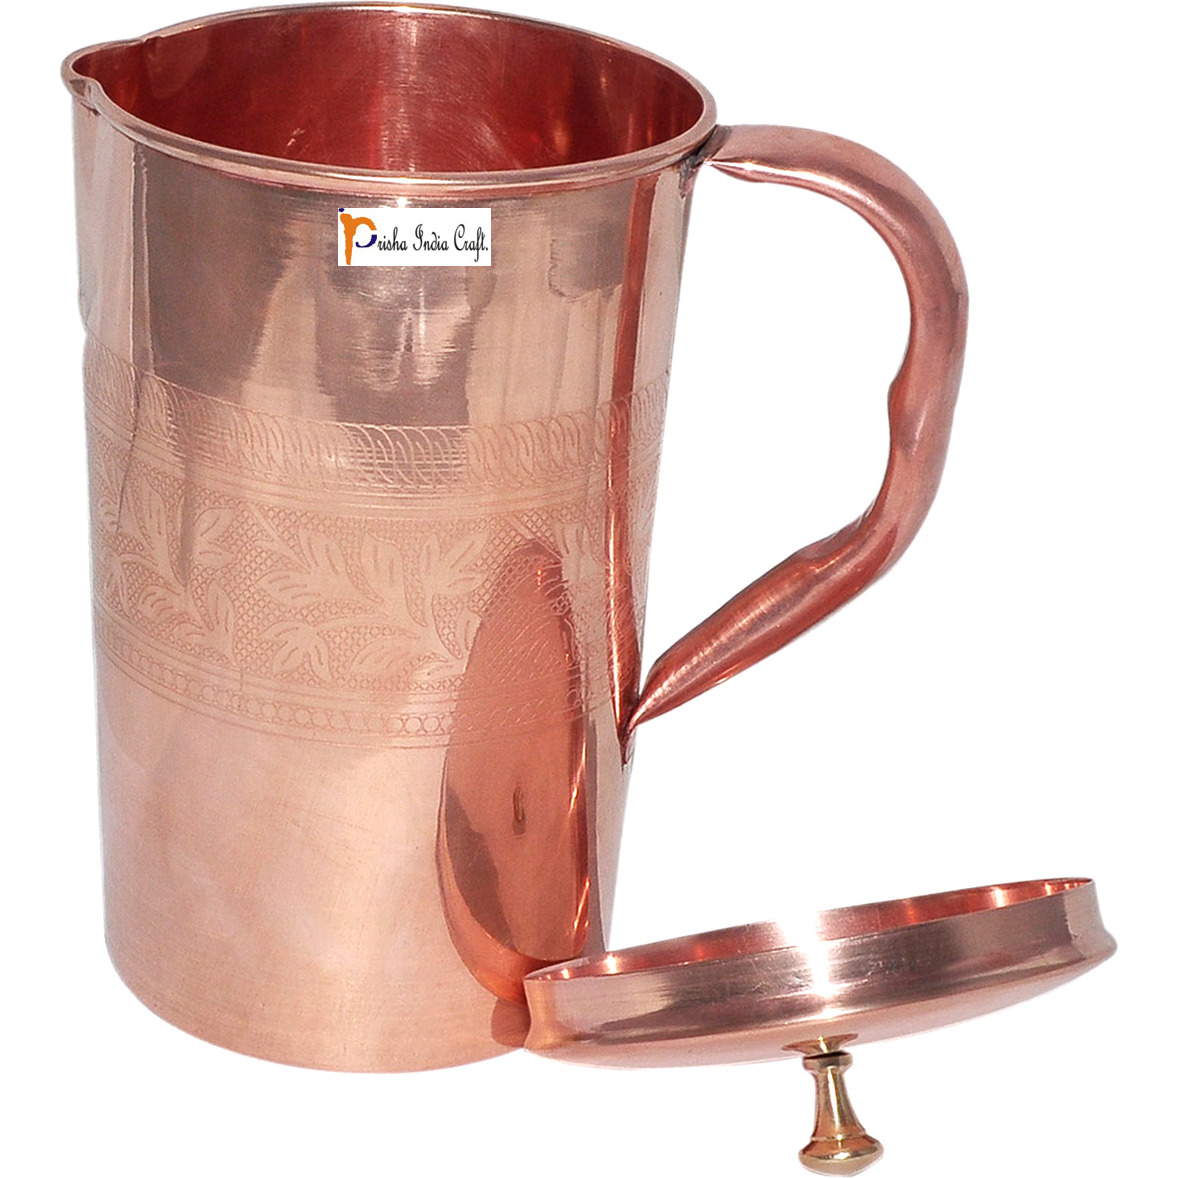 Prisha India Craft B. Set of 6 Dinnerware Traditional Stainless Steel Copper Dinner Set of Thali Plate, Bowls, Glass and Spoon, Dia 13  With 1 Pure Copper Embossed Pitcher Jug - Christmas Gift